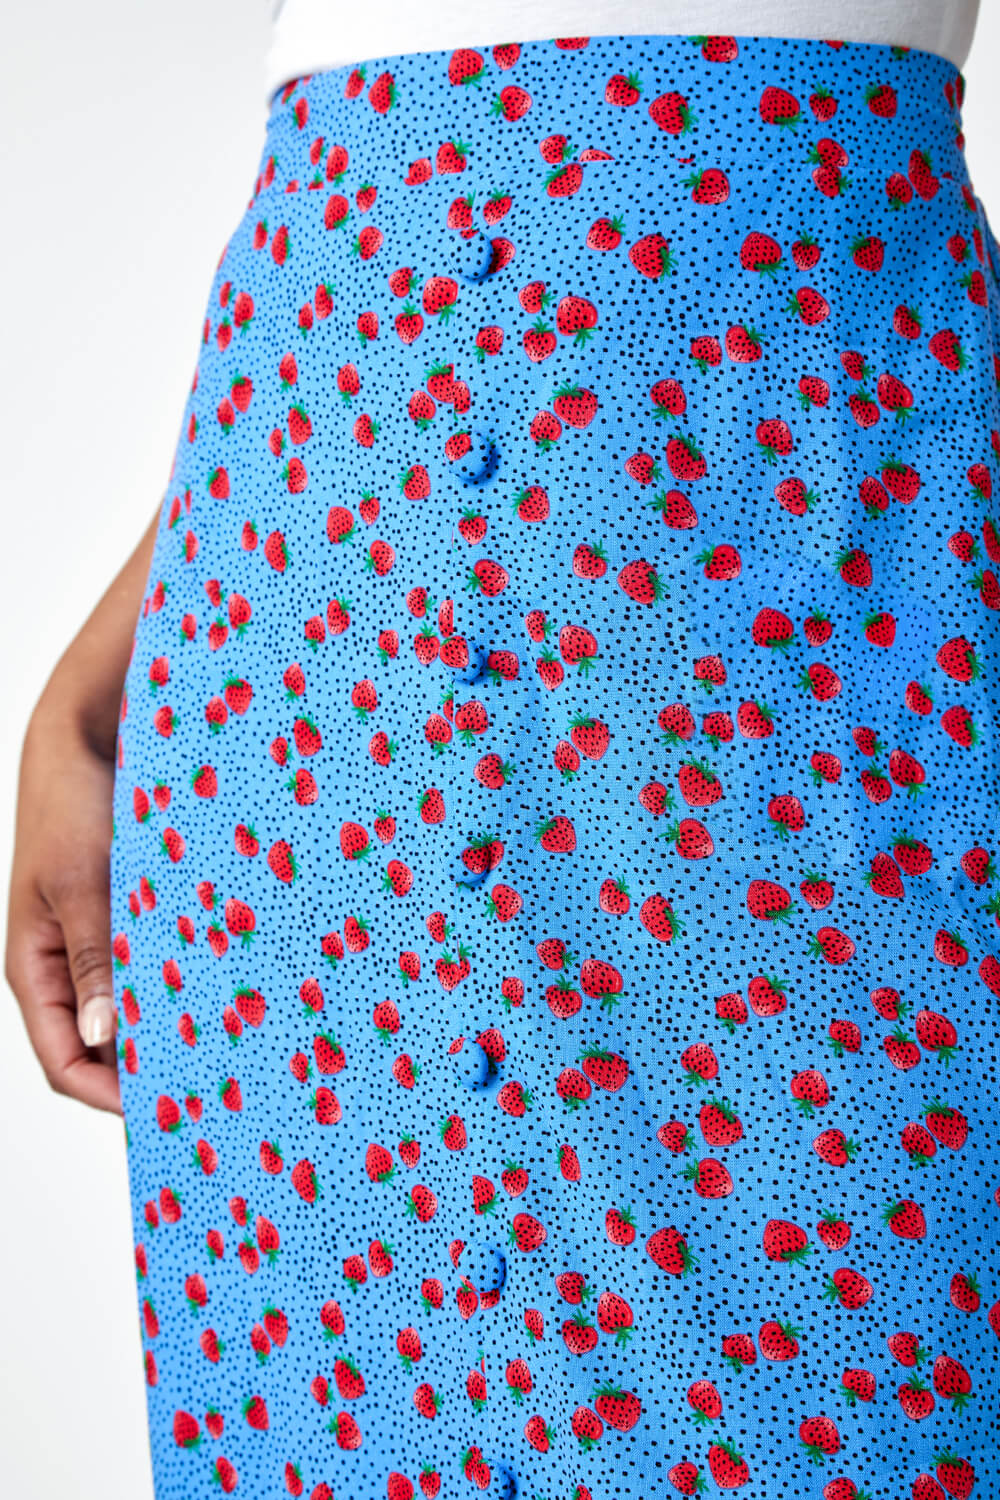 Blue Petite Strawberry Button Stretch Skirt, Image 5 of 5